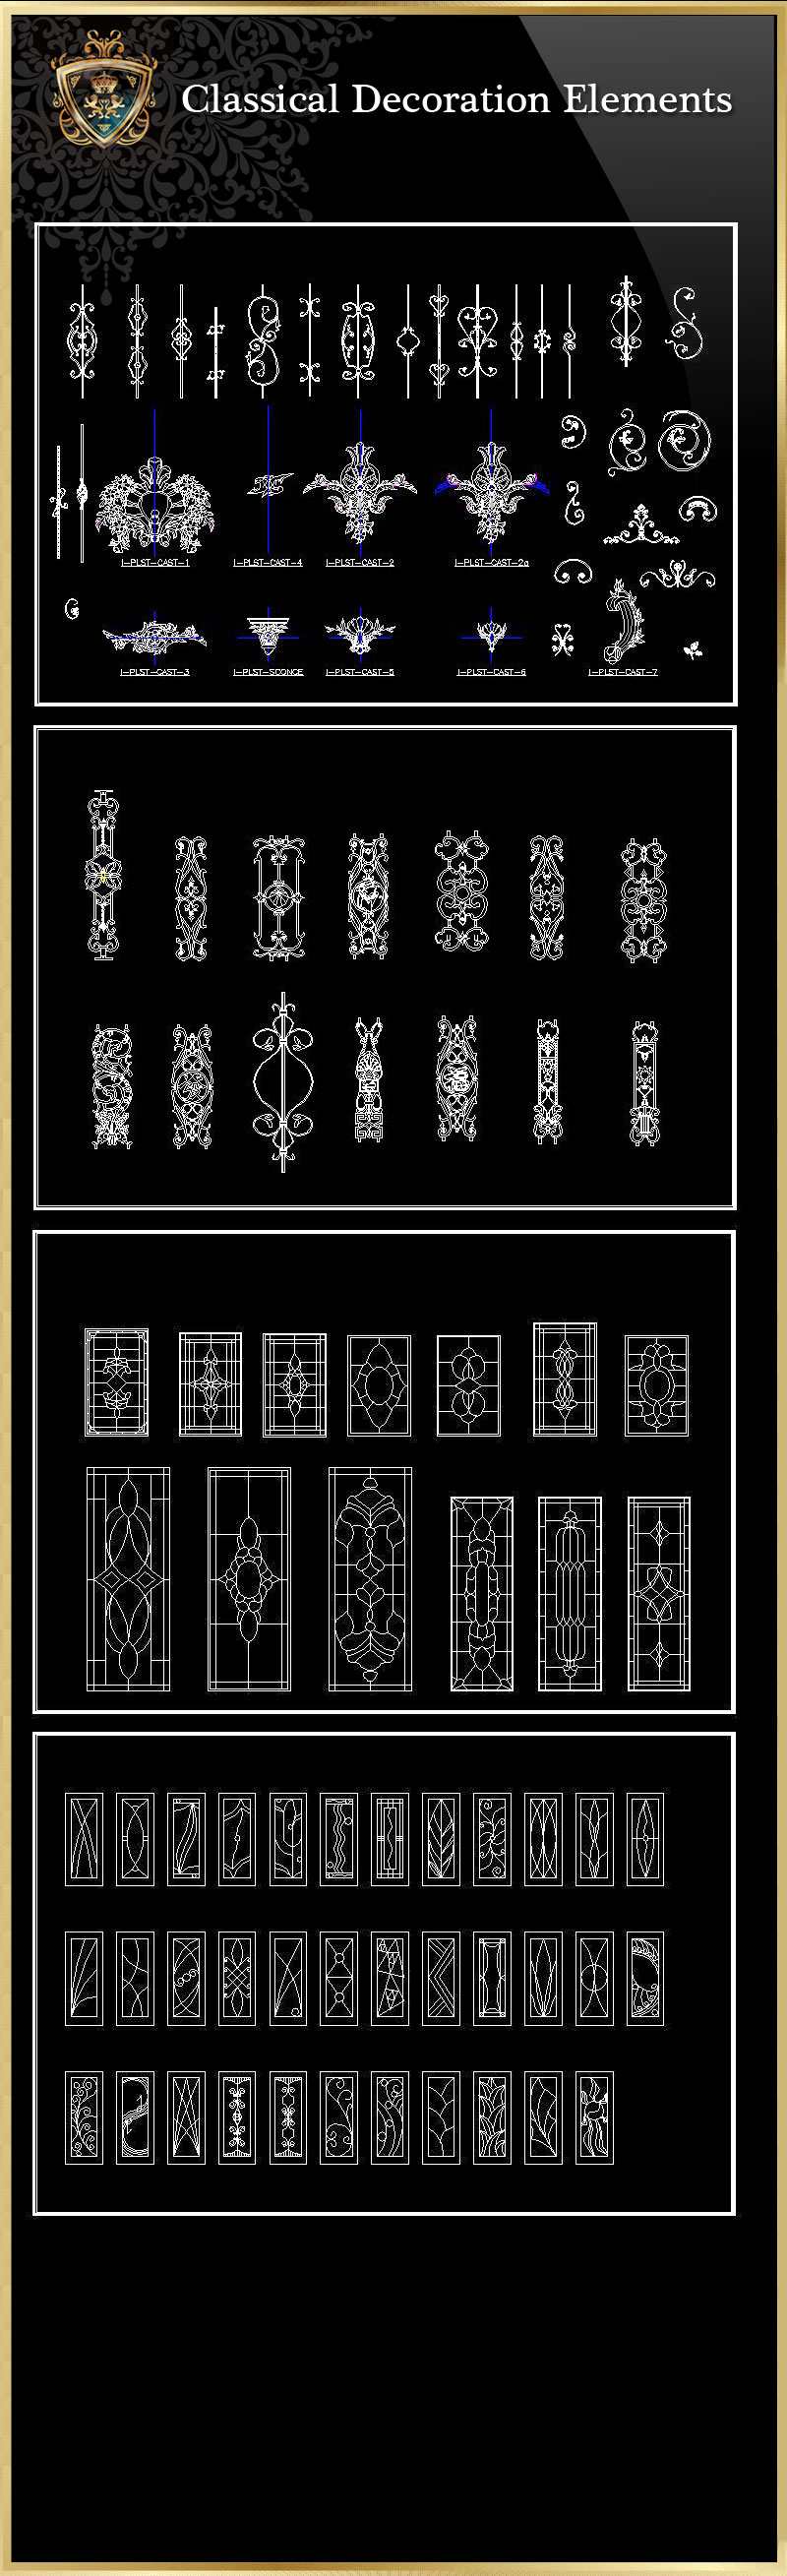 ★【Classical Decoration Elements 02】Download Luxury Architectural Design CAD Drawings--Over 20000+ High quality CAD Blocks and Drawings Download!